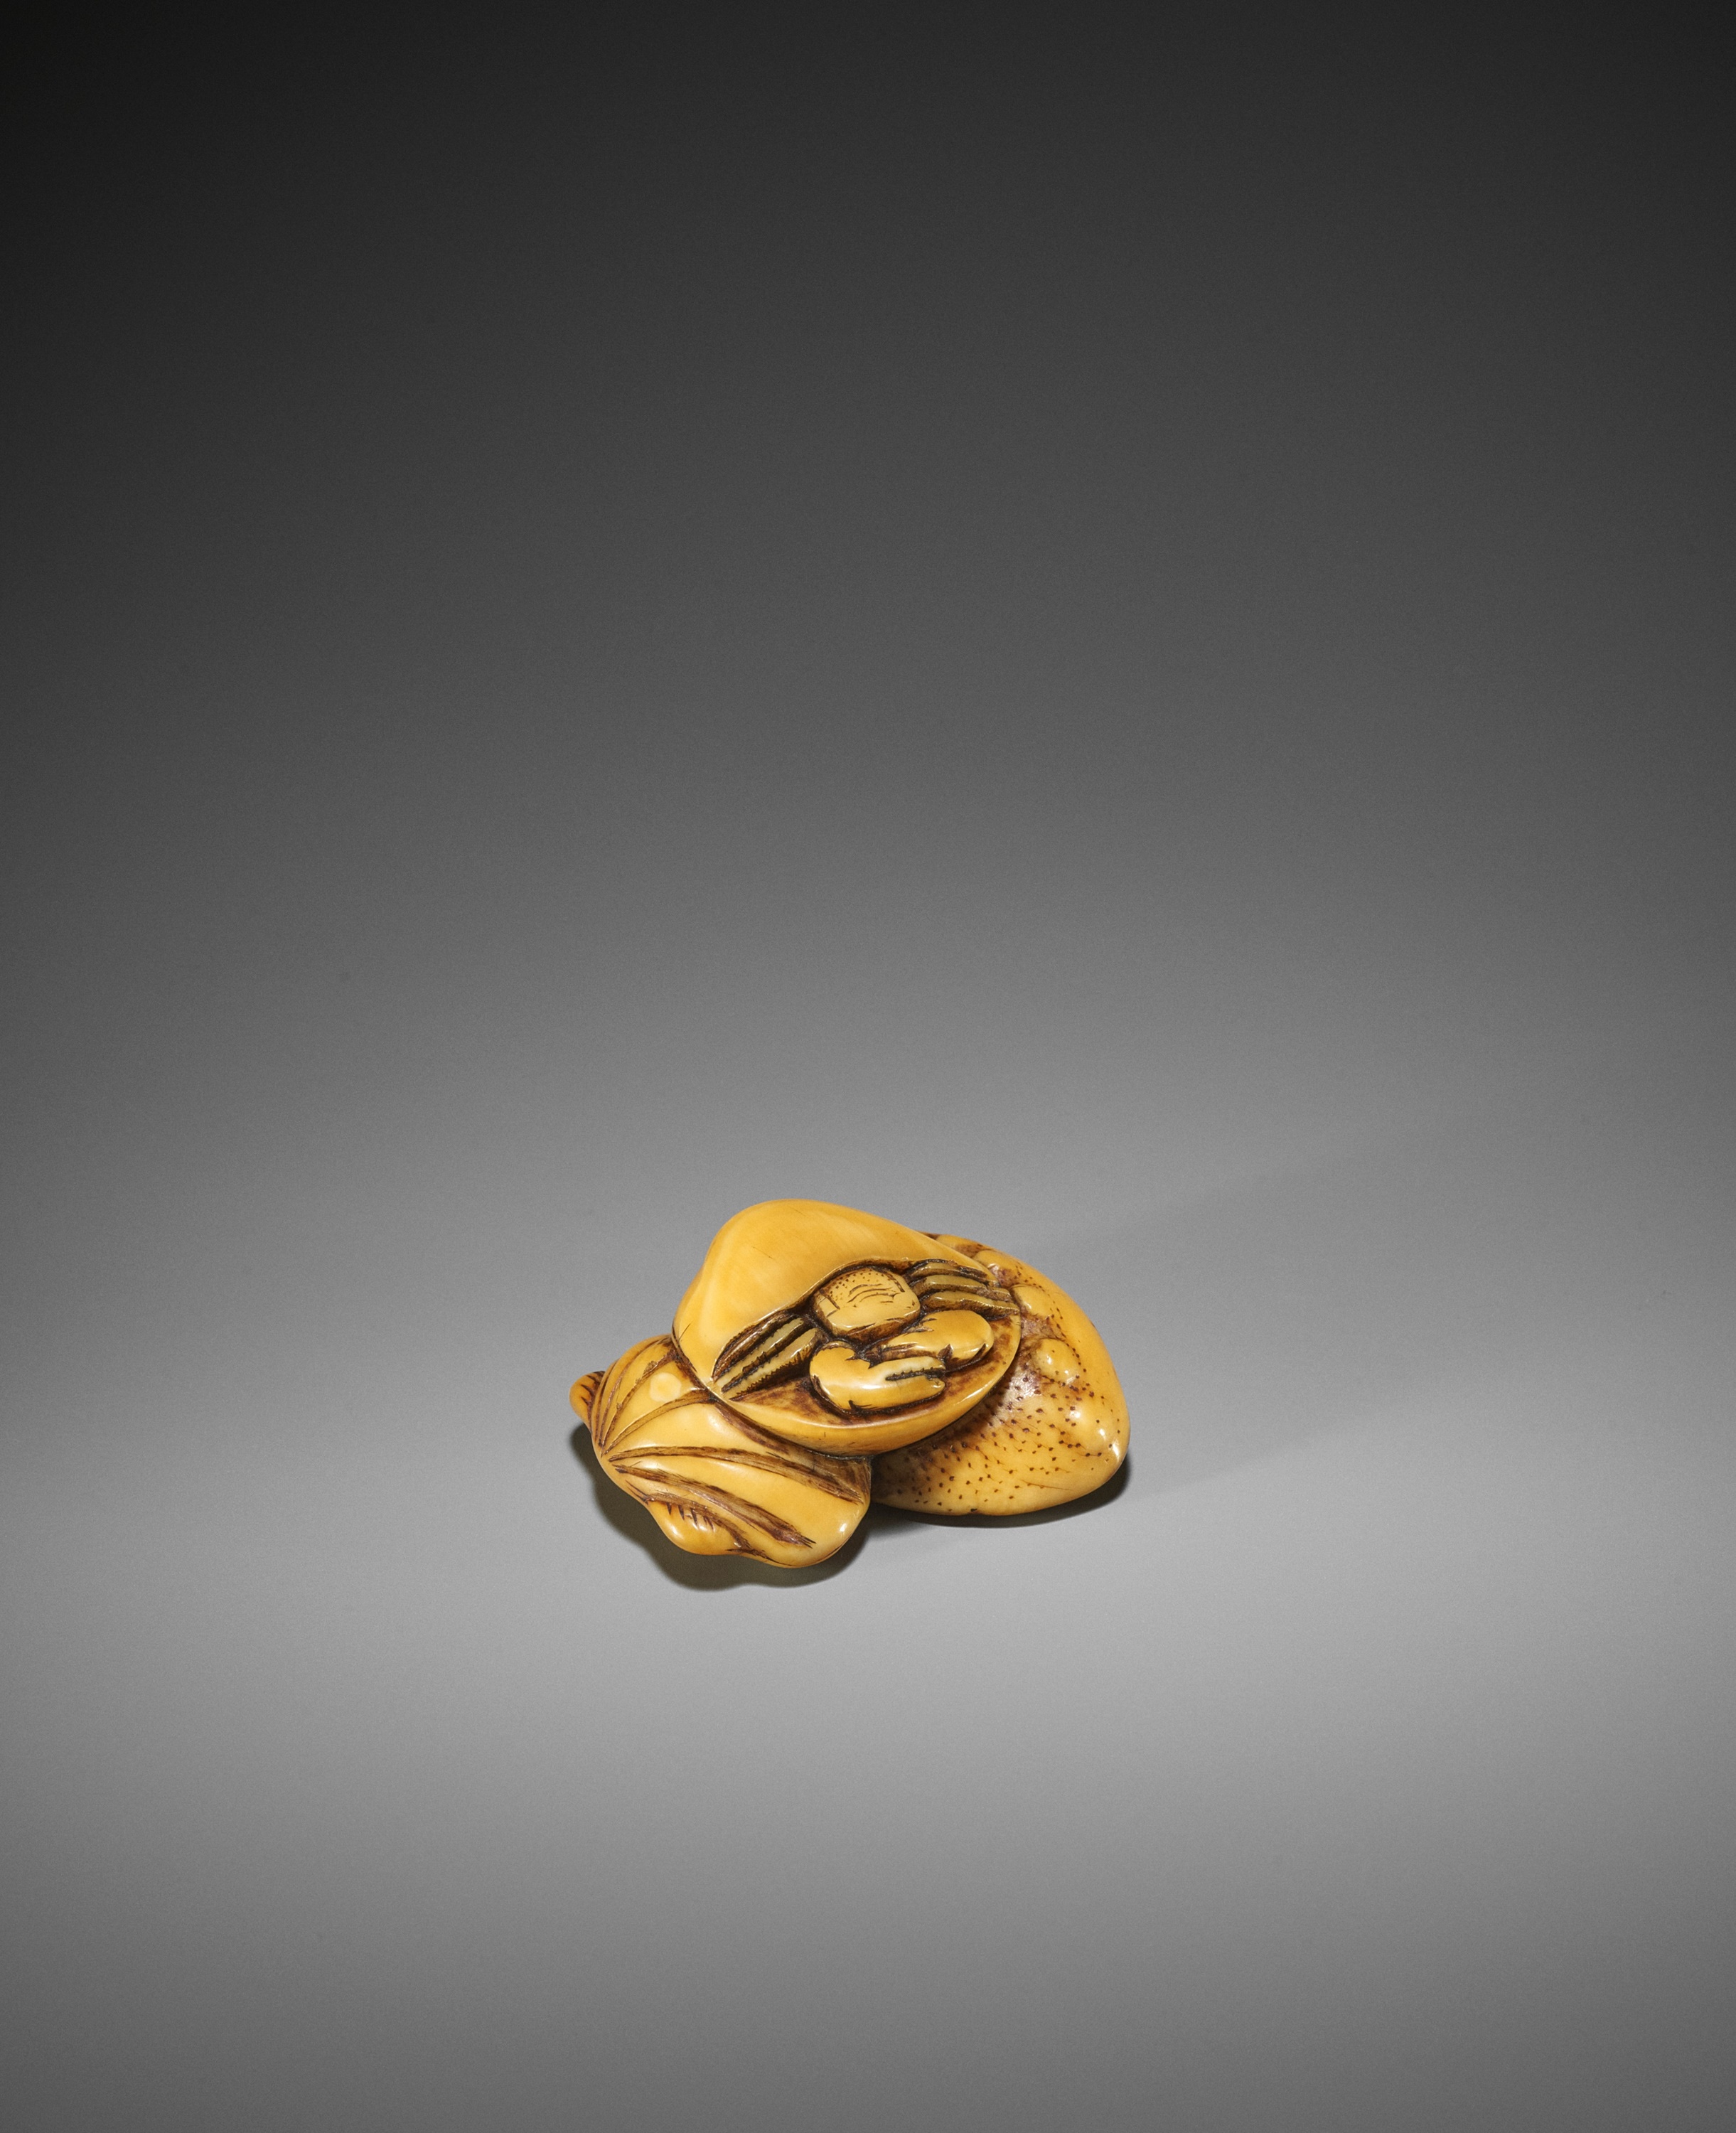 AN EARLY IVORY NETSUKE OF A HERMIT CRAB AND SHELLS